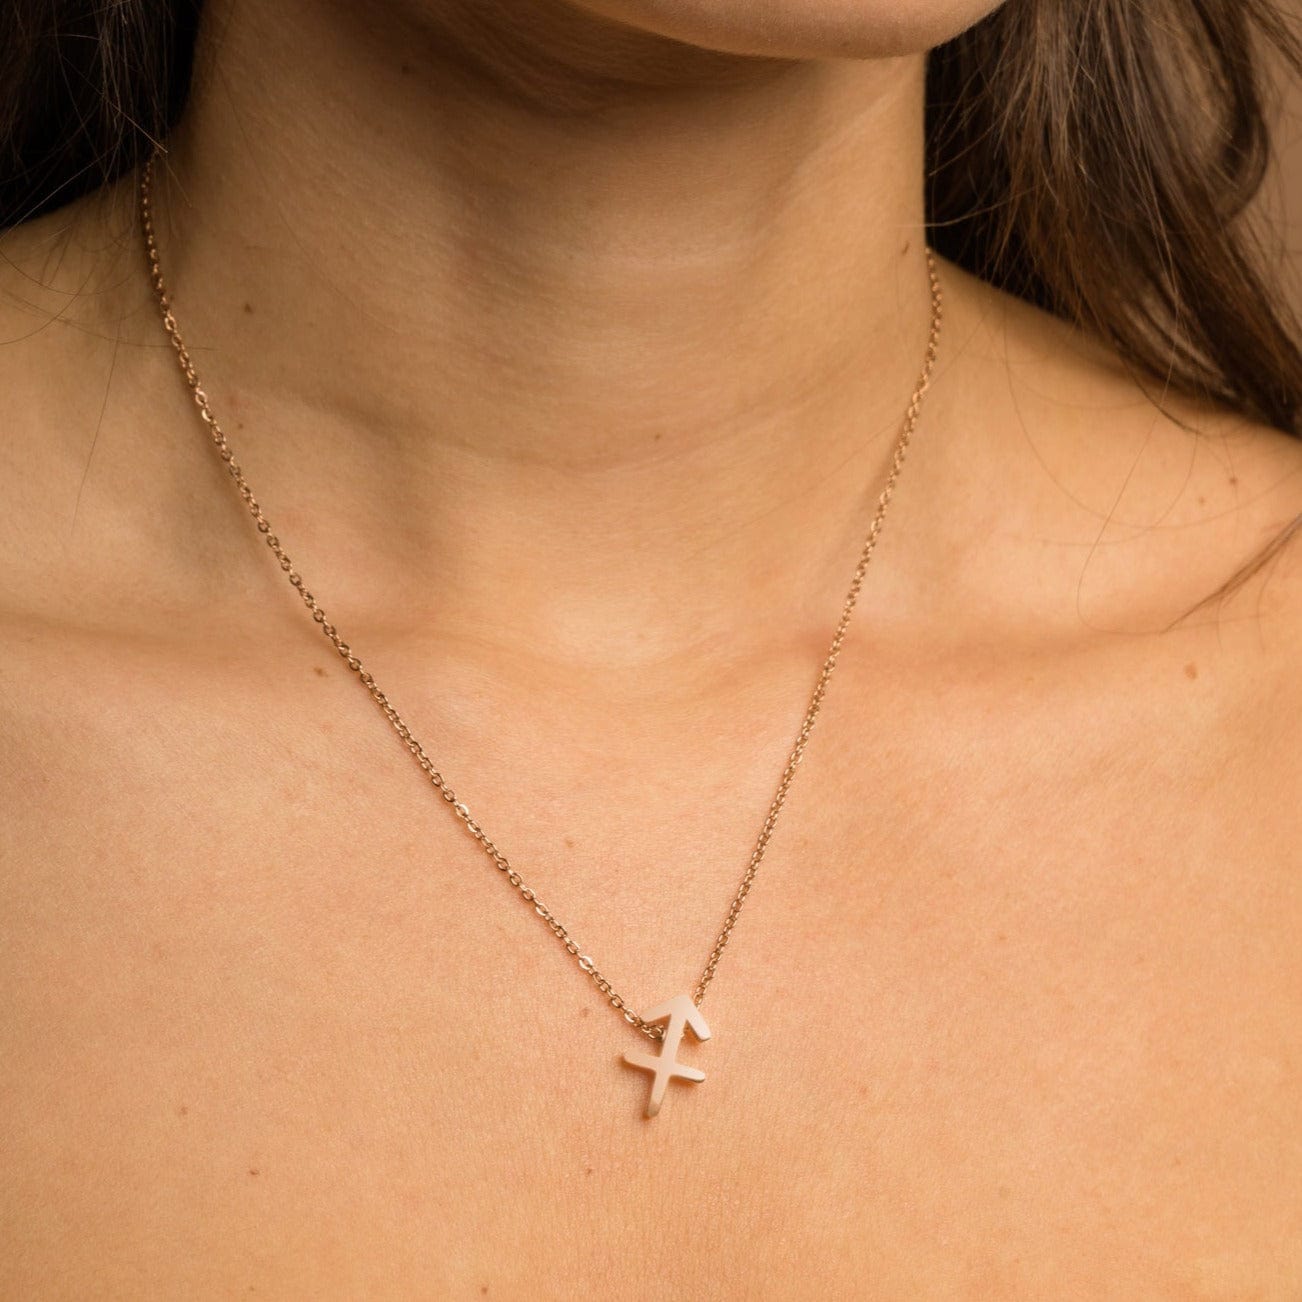 bianco rosso Necklaces Sagittarius - Necklace cyprus greece jewelry gift free shipping europe worldwide